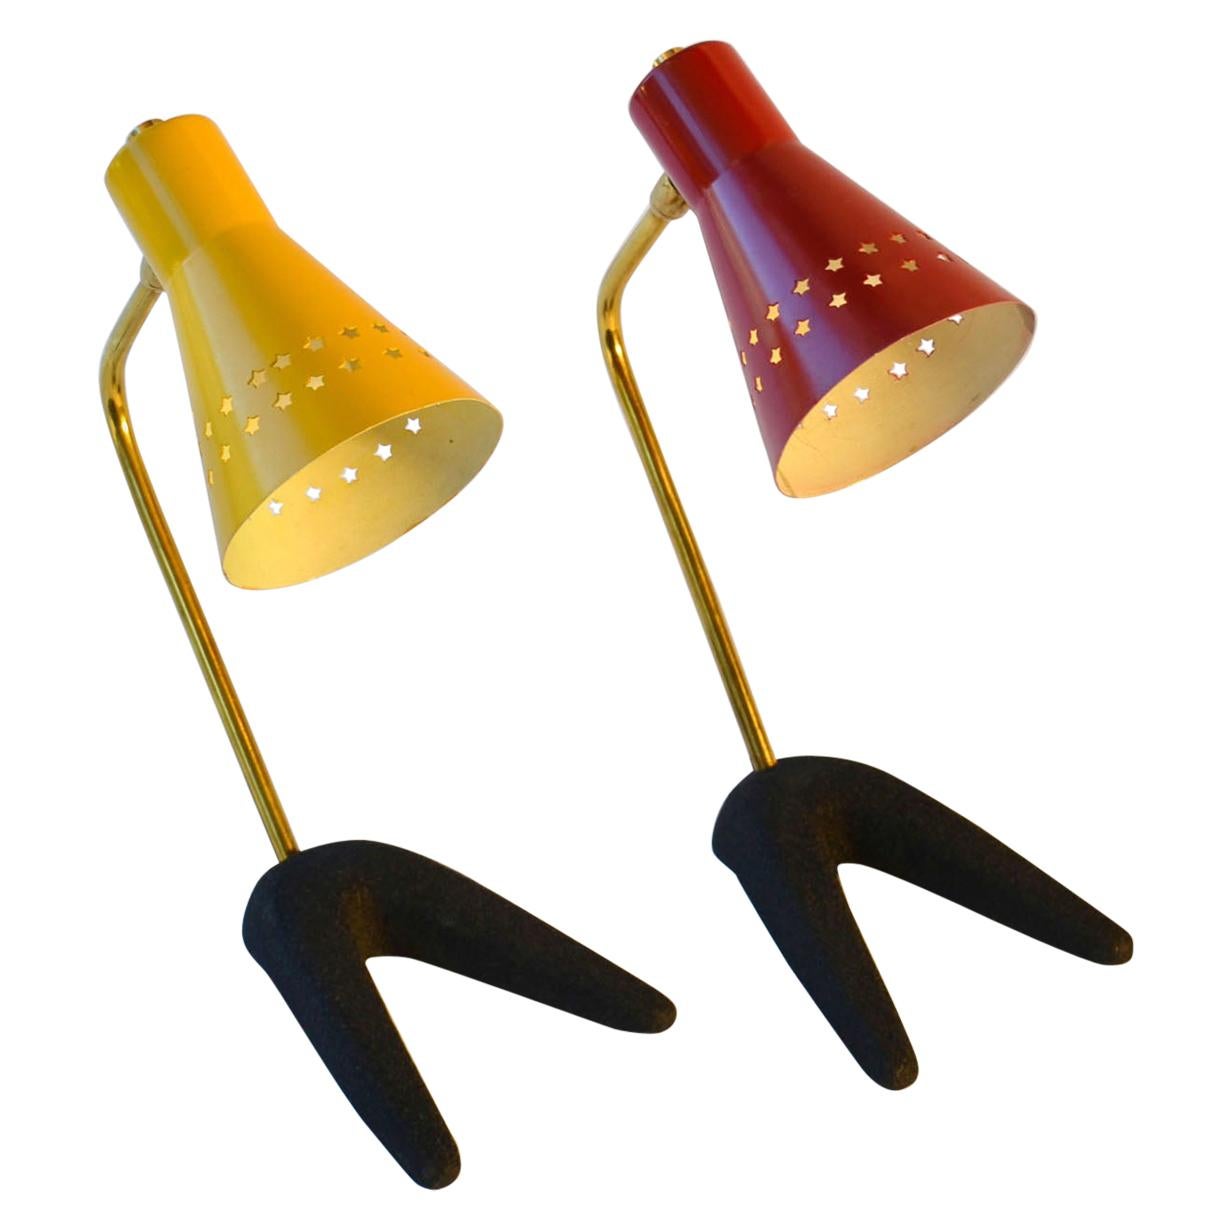 1950s Pair of French Bedside Lamps in Red and Yellow